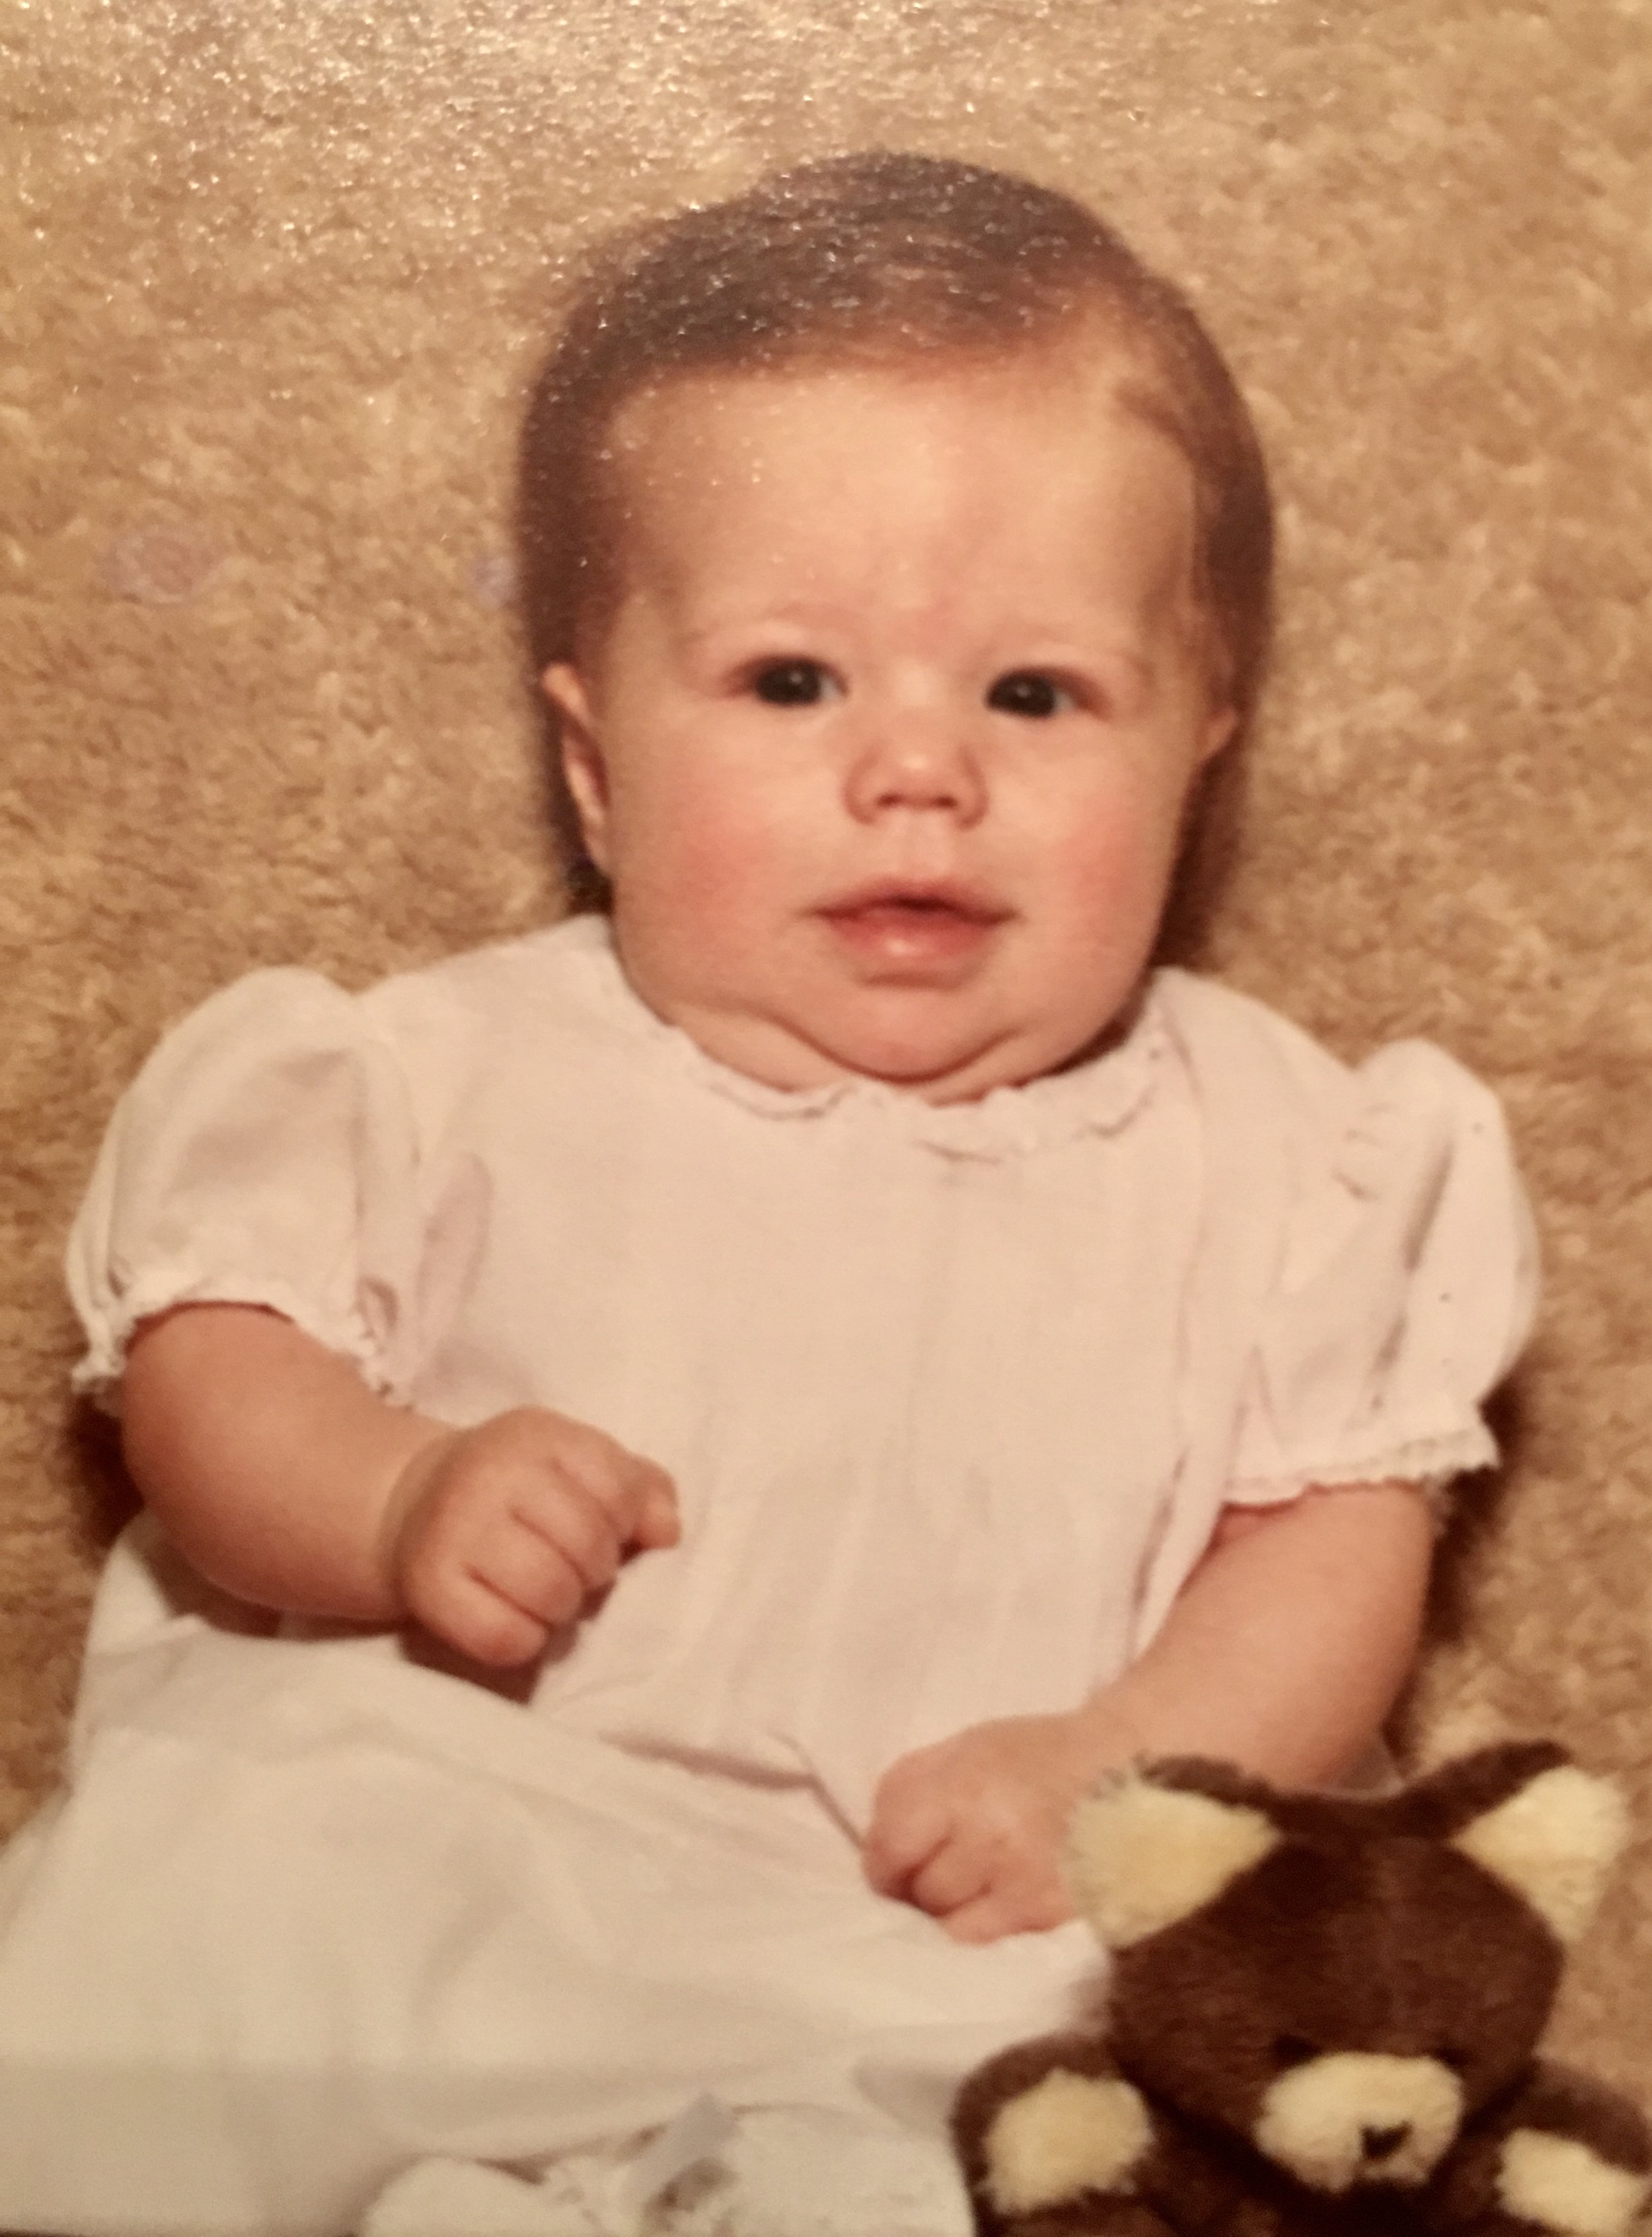  I’m probably 3 months or so here. As you can see, I was born with plenty of hair. 